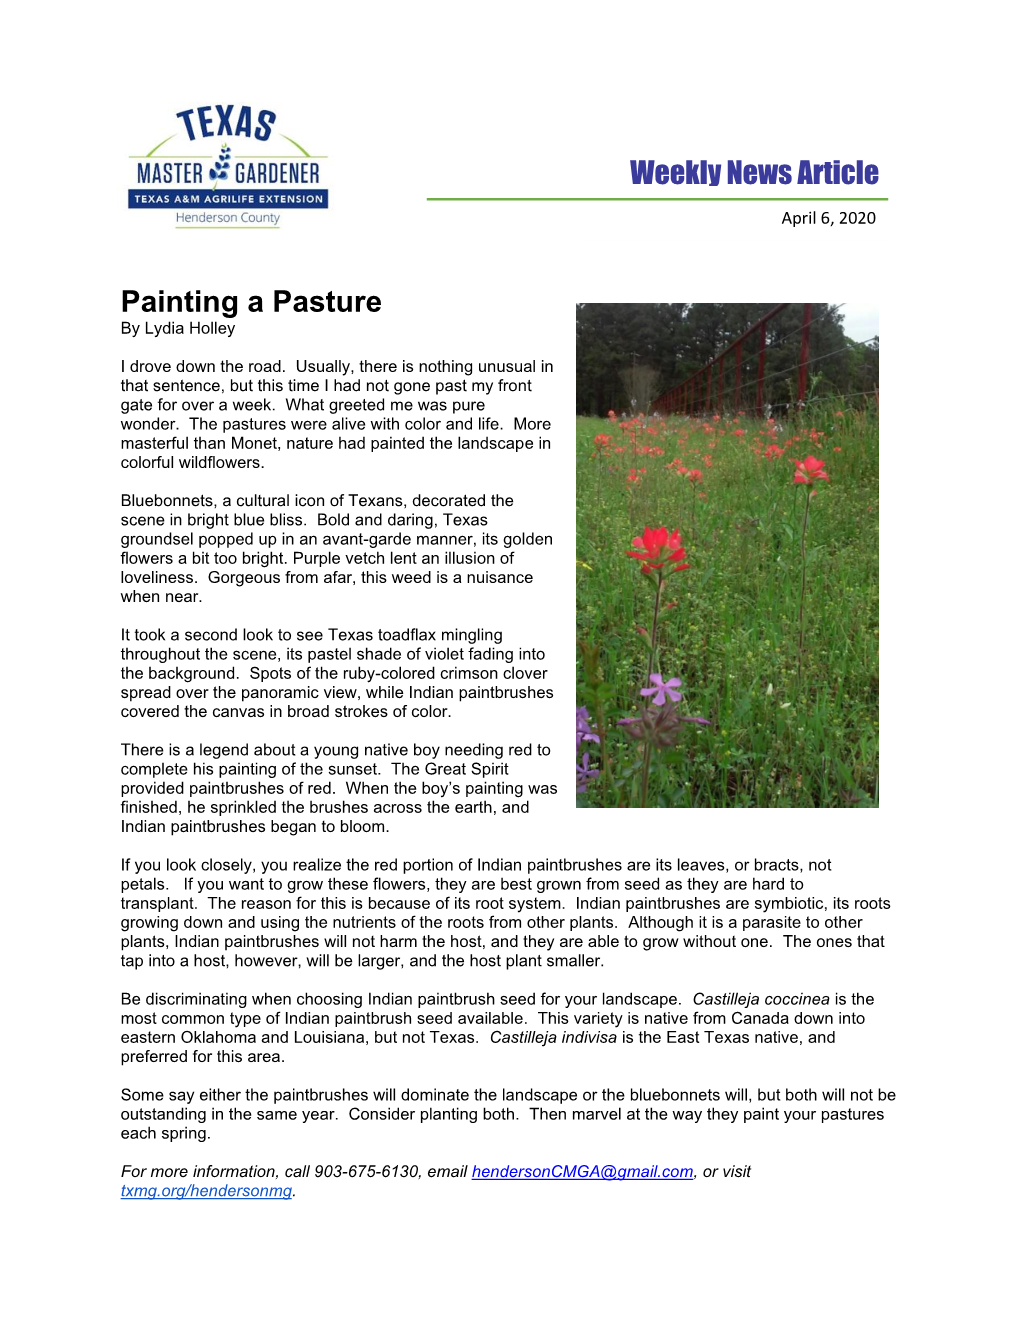 Painting a Pasture Weekly News Article